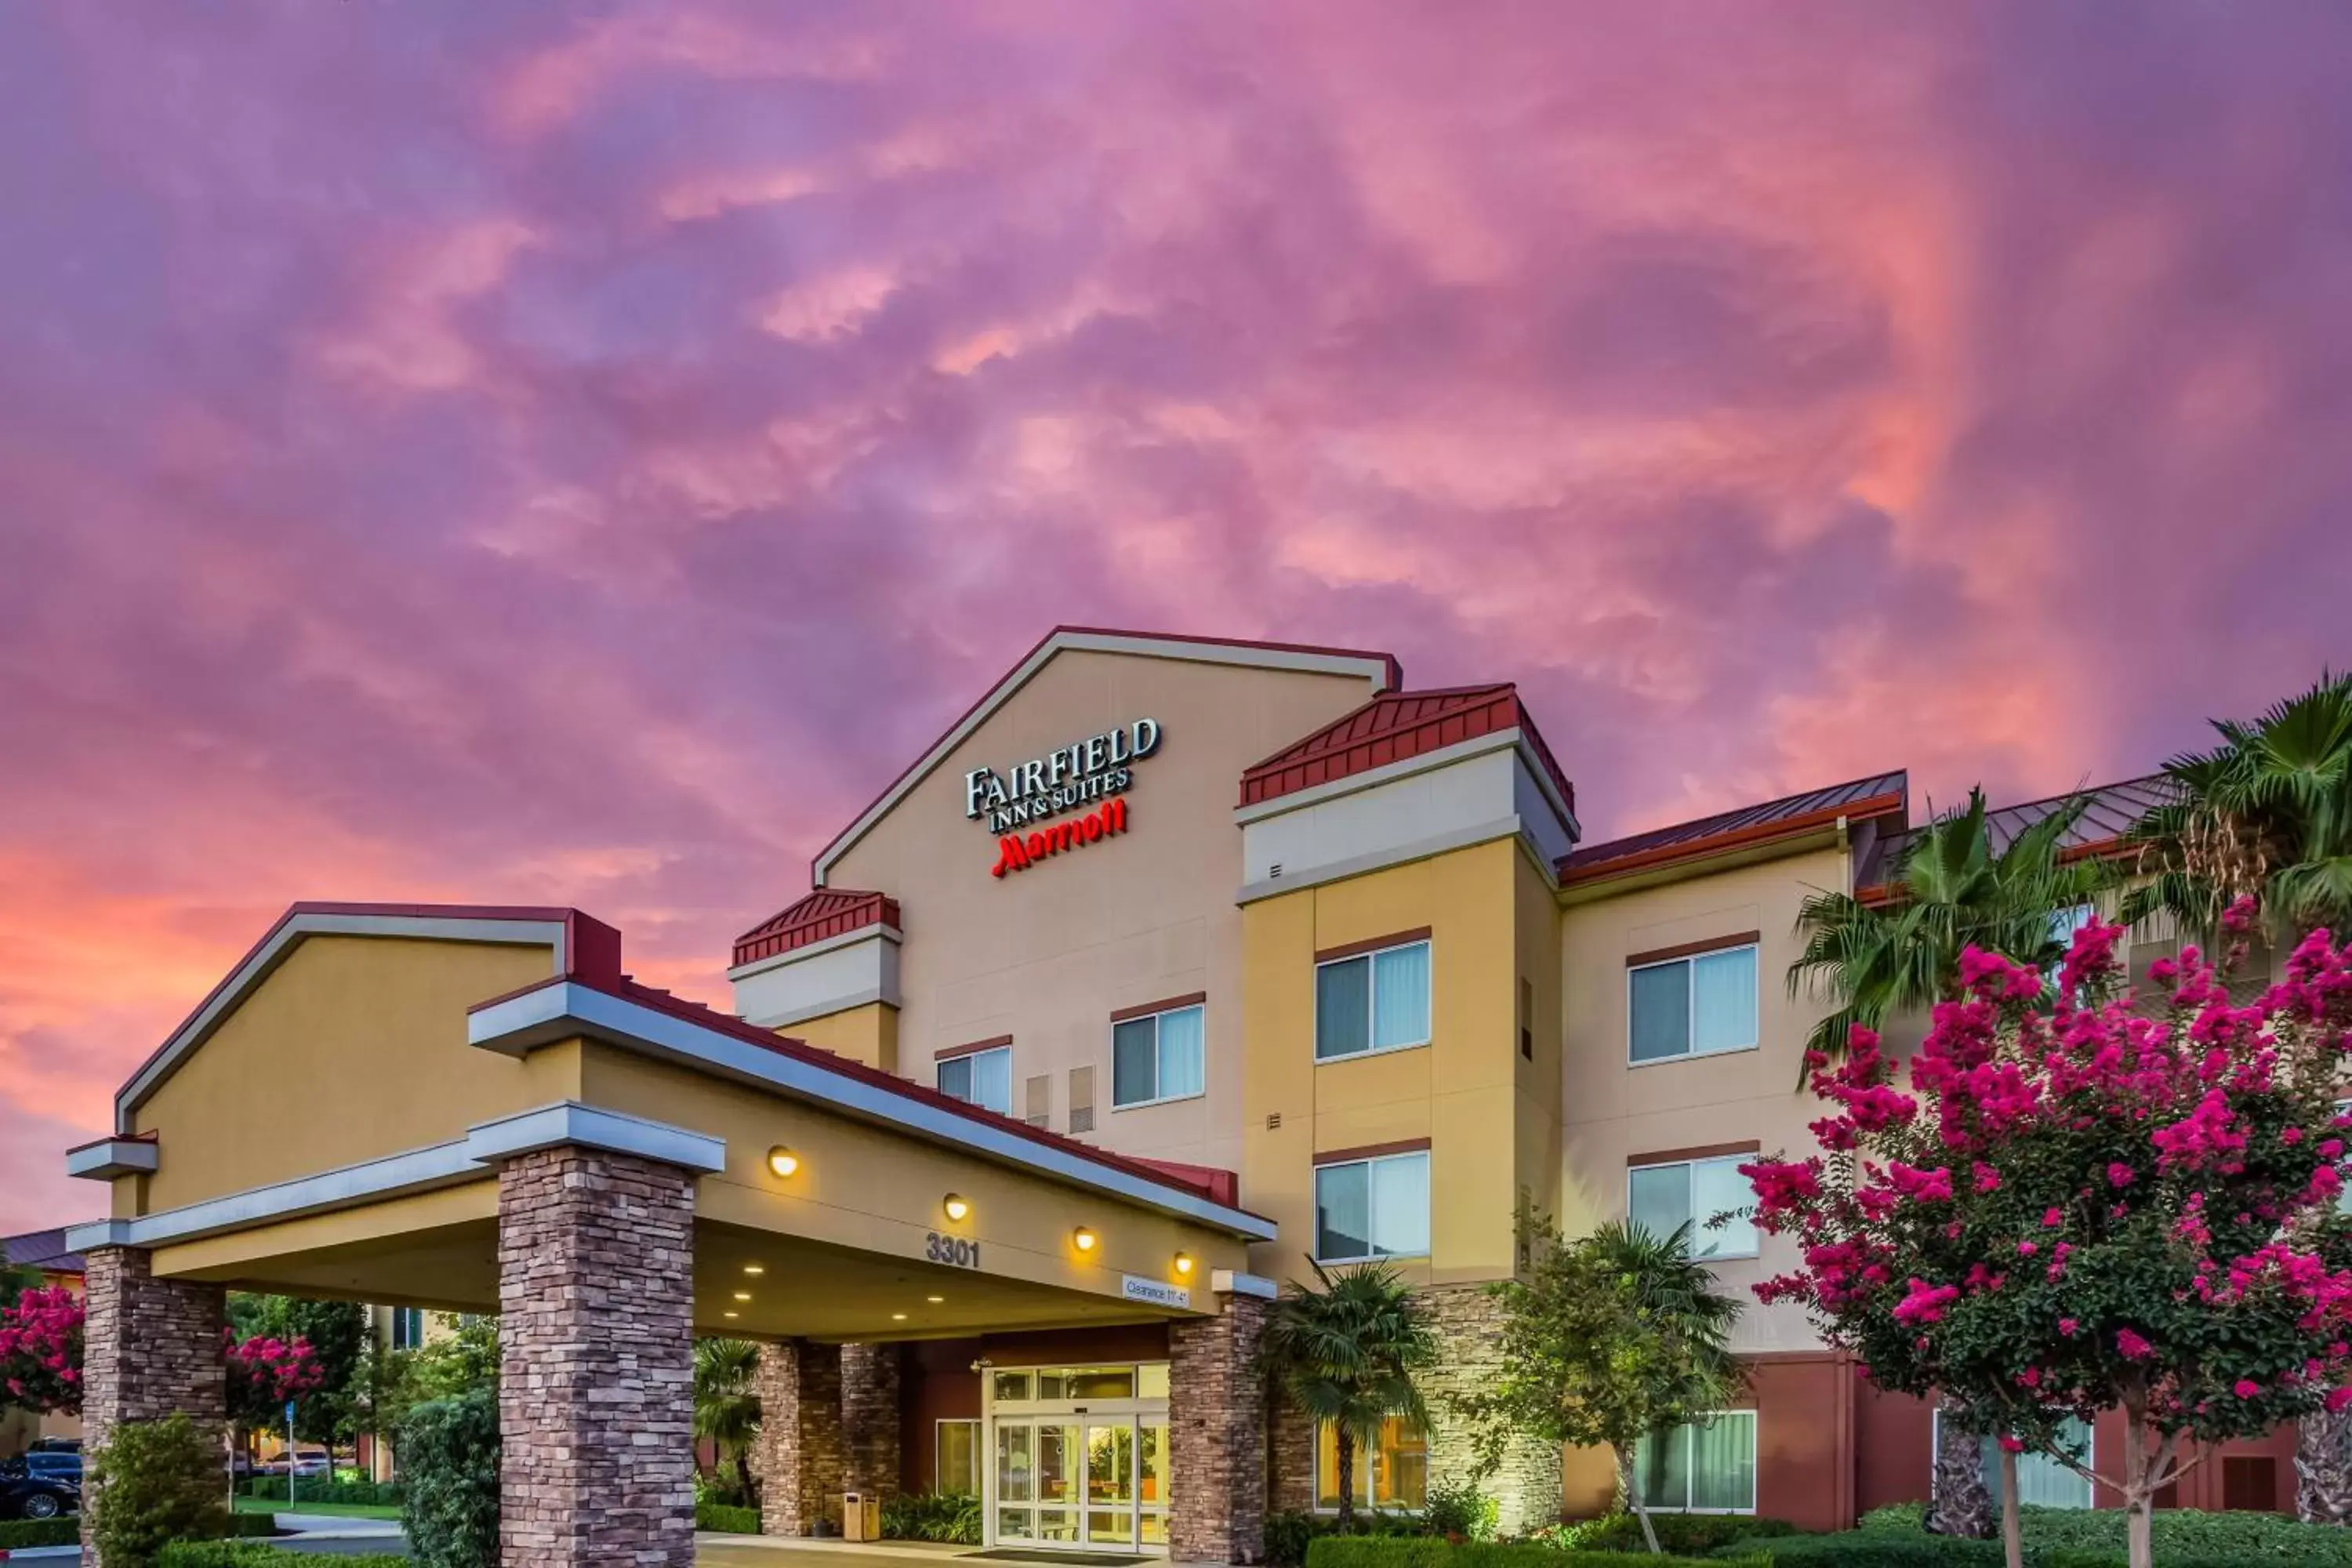 Property Building in Fairfield Inn and Suites Turlock